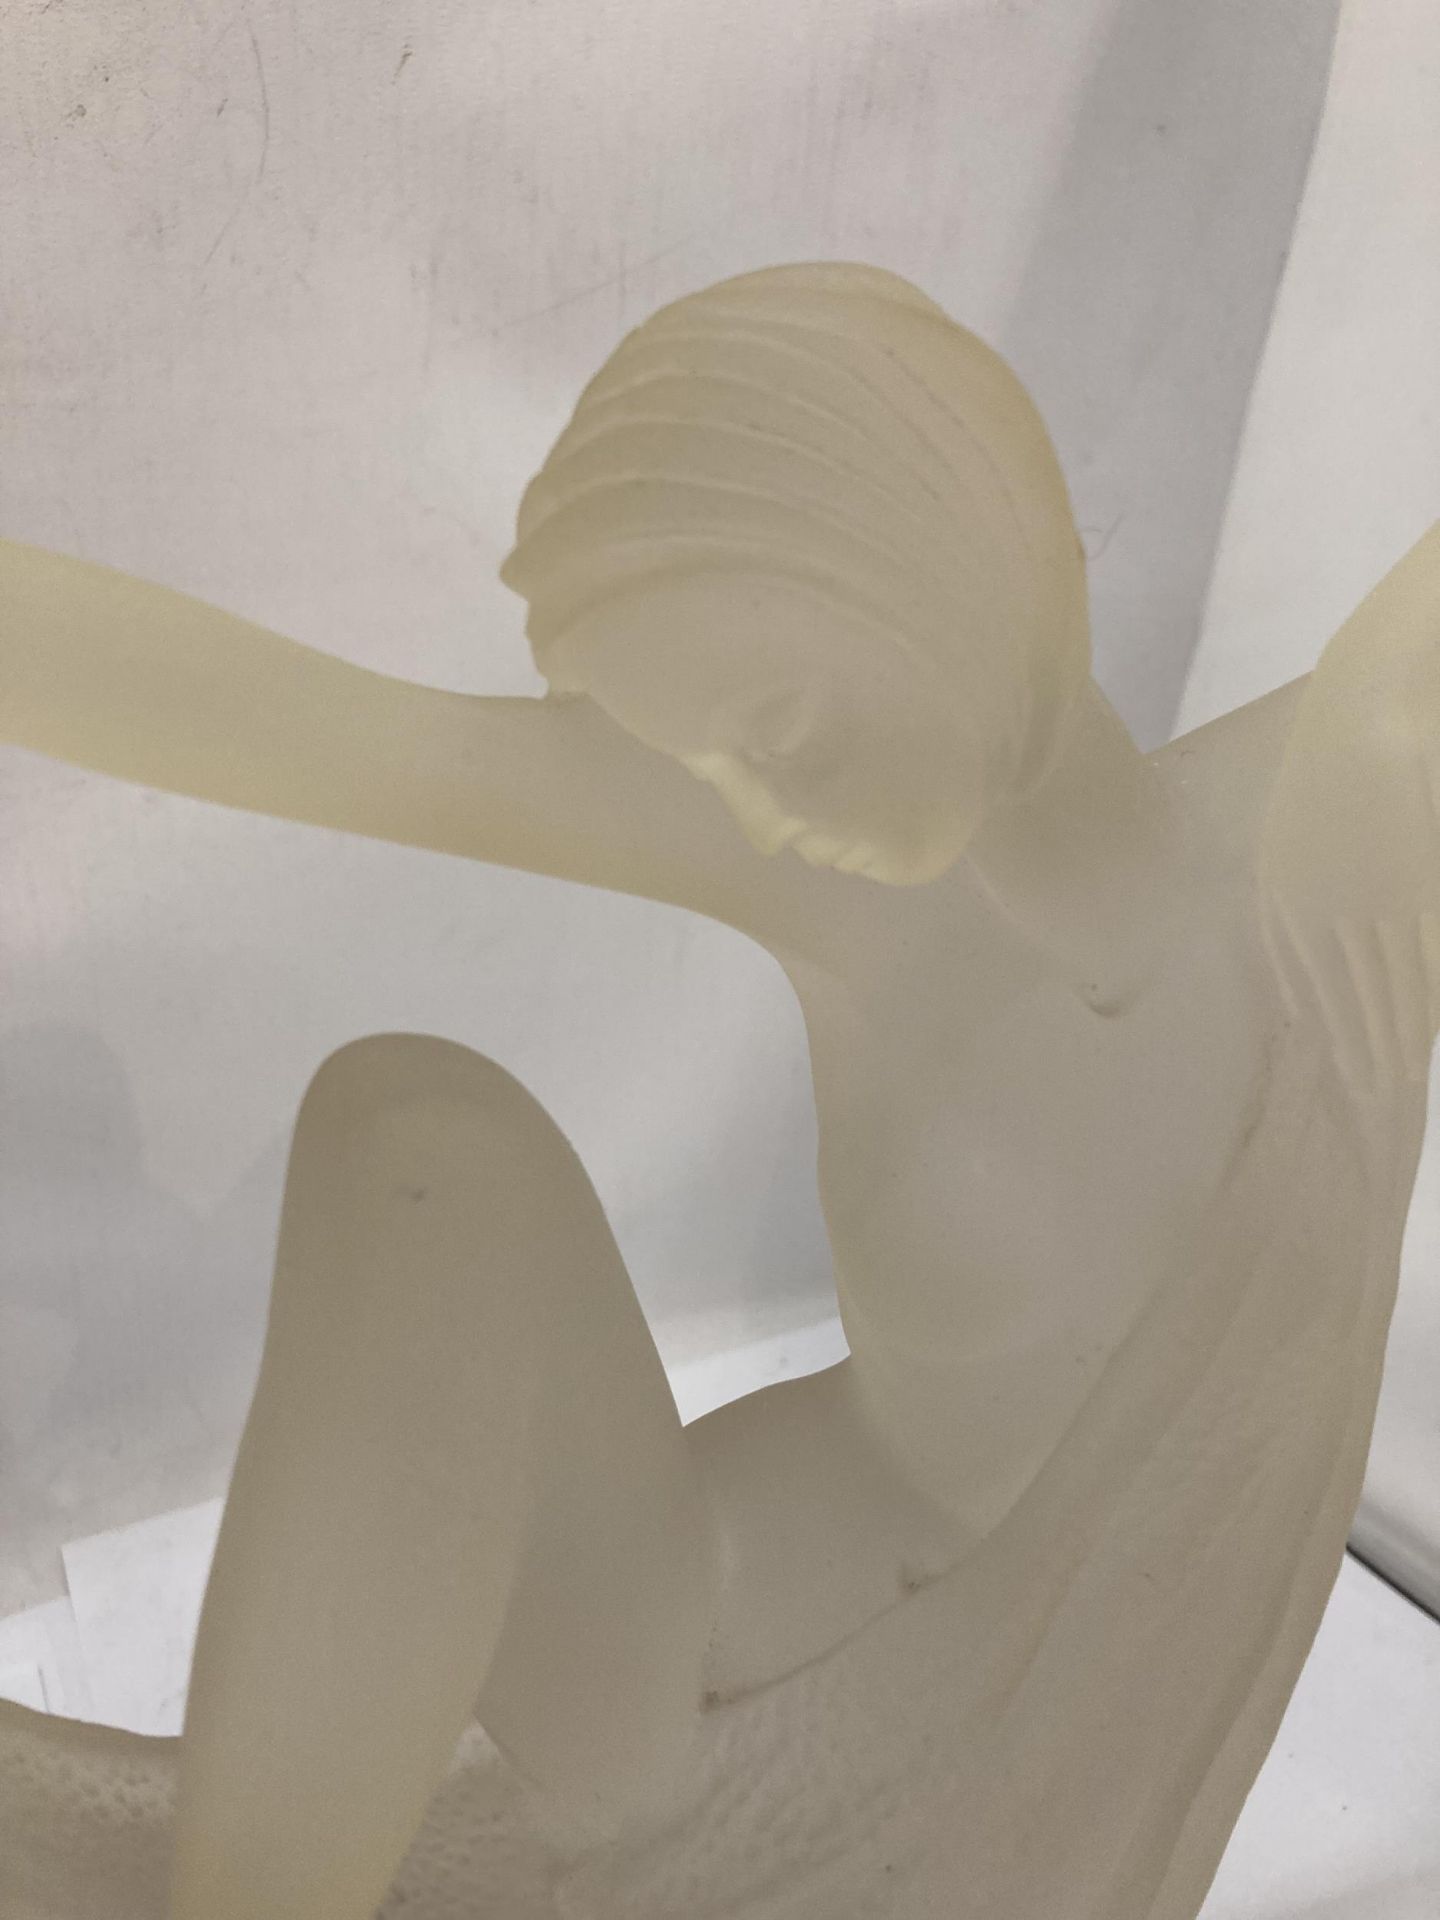 AN ART DECO FROSTED GLASS FIGURE - Image 3 of 4